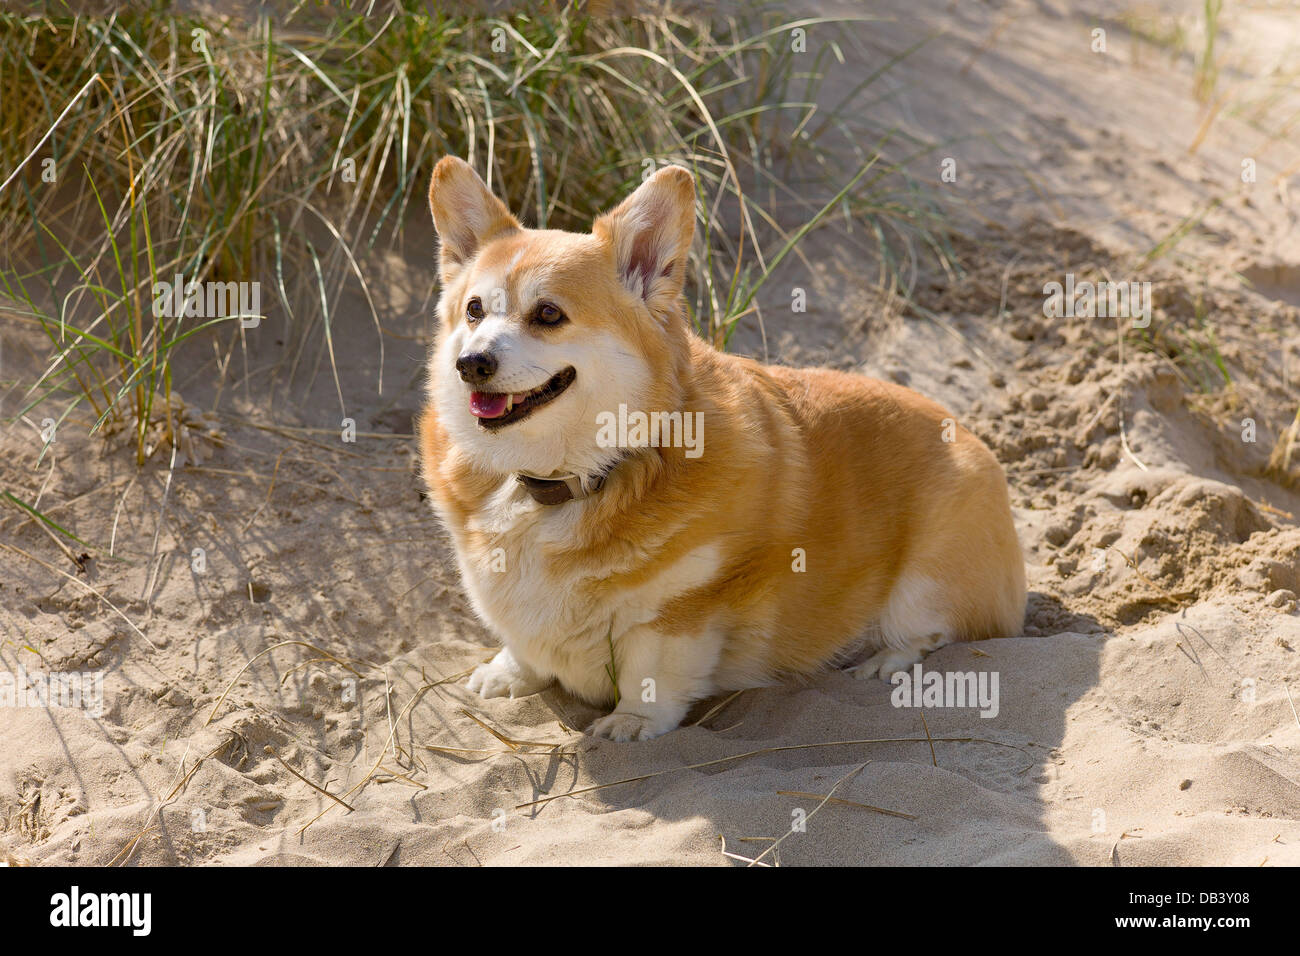 A pedigree Pembroke corgi sitting in sand dunes, looking alert, a happy outlook, ears pricked up, nice tan and white marking Stock Photo